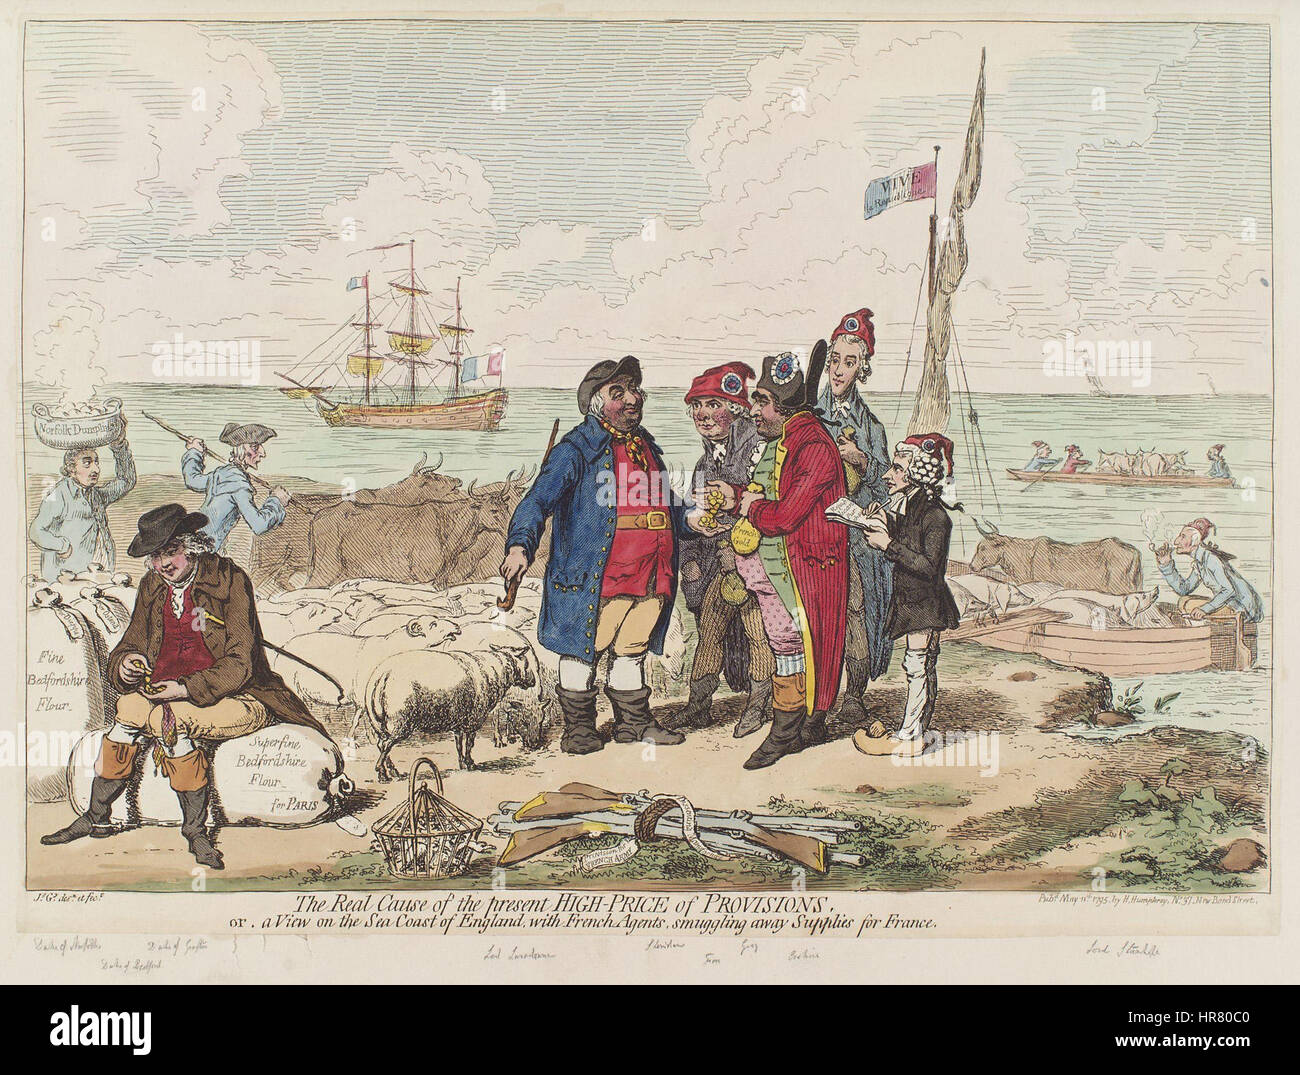 The real cause of the present high price of provisions, or, a view on the sea coast of England, with French agents, smuggling away supplies for France by James Gillray Stock Photo